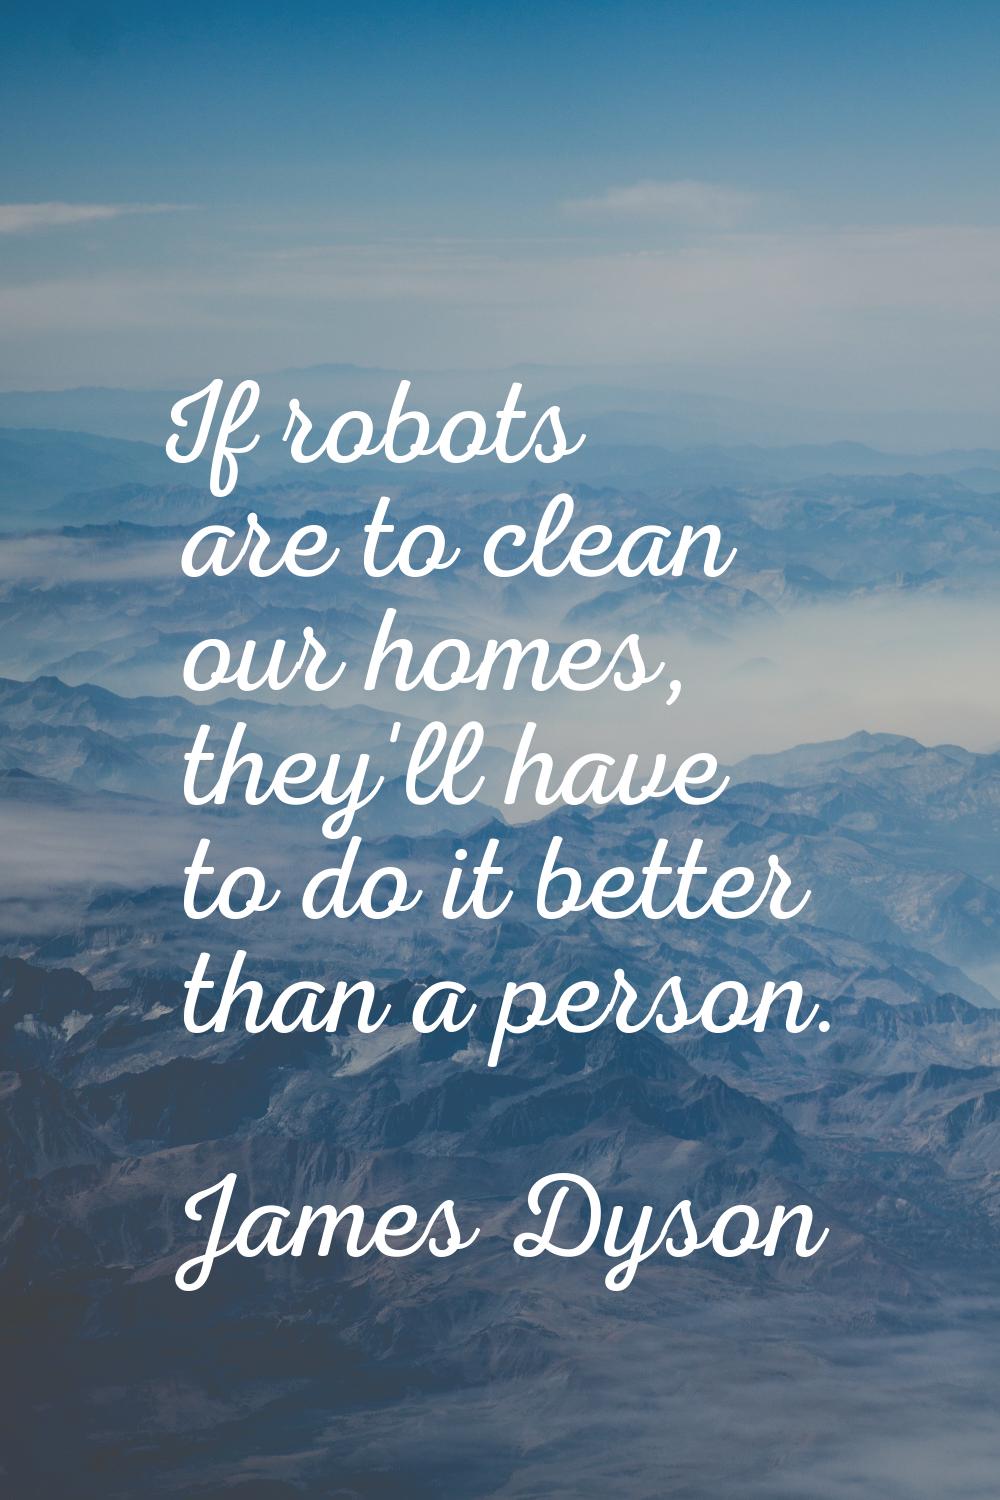 If robots are to clean our homes, they'll have to do it better than a person.